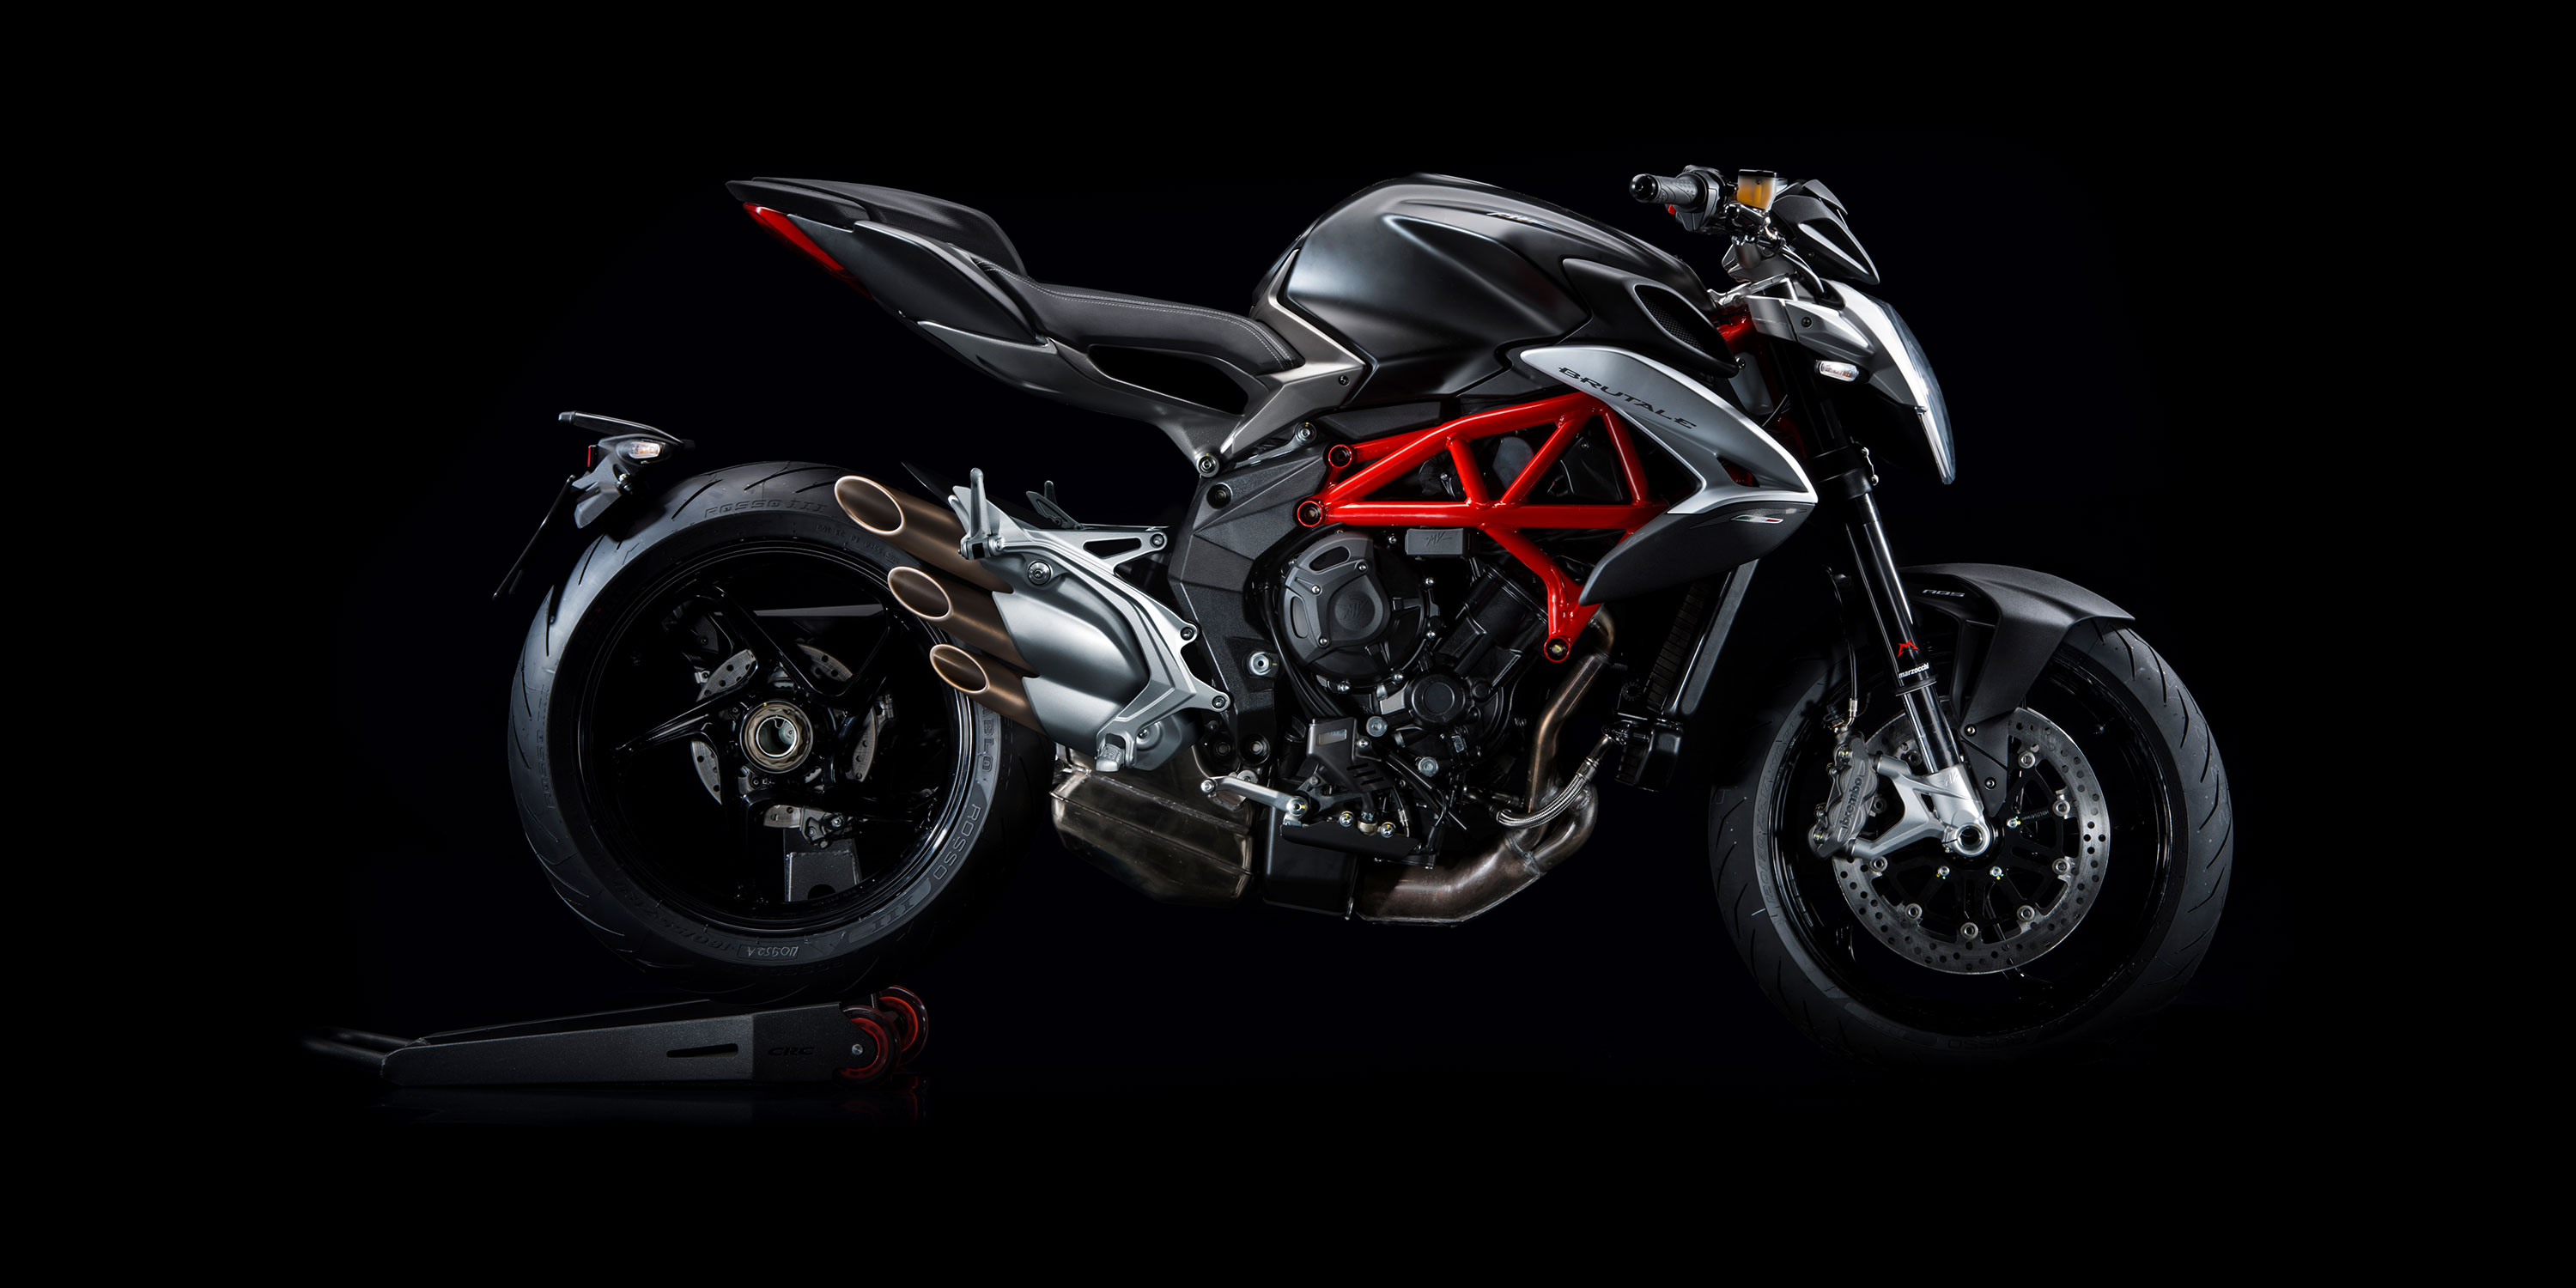 2016 MV Agusta Brutale 800, HD Bikes, 4k Wallpapers, Image, Backgrounds, Photos and Pictures